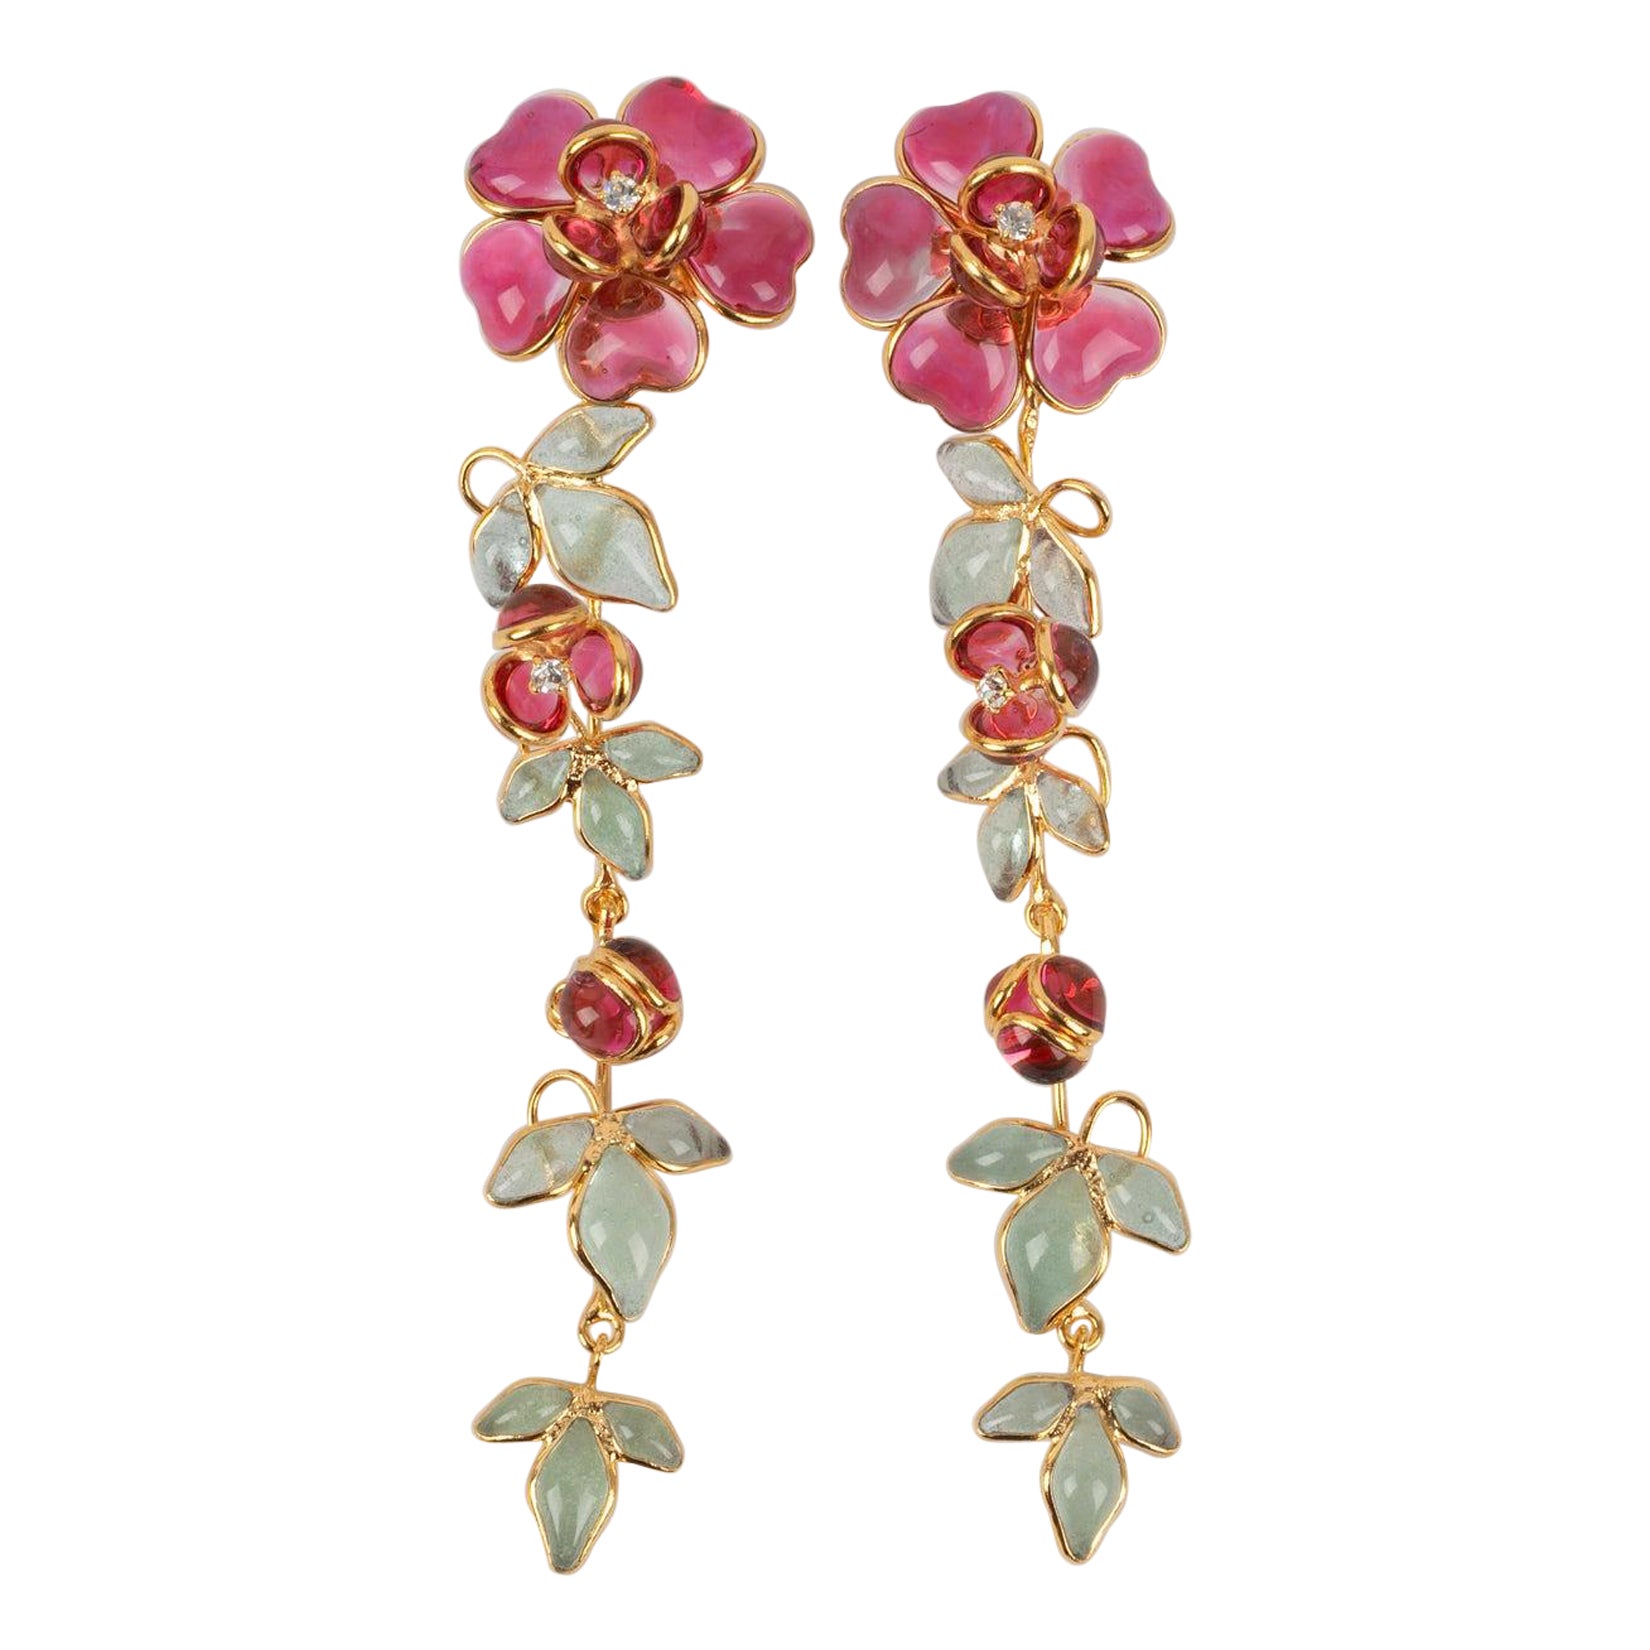 Augustine Golden Metal Earrings with Glass Paste in Pink Tones